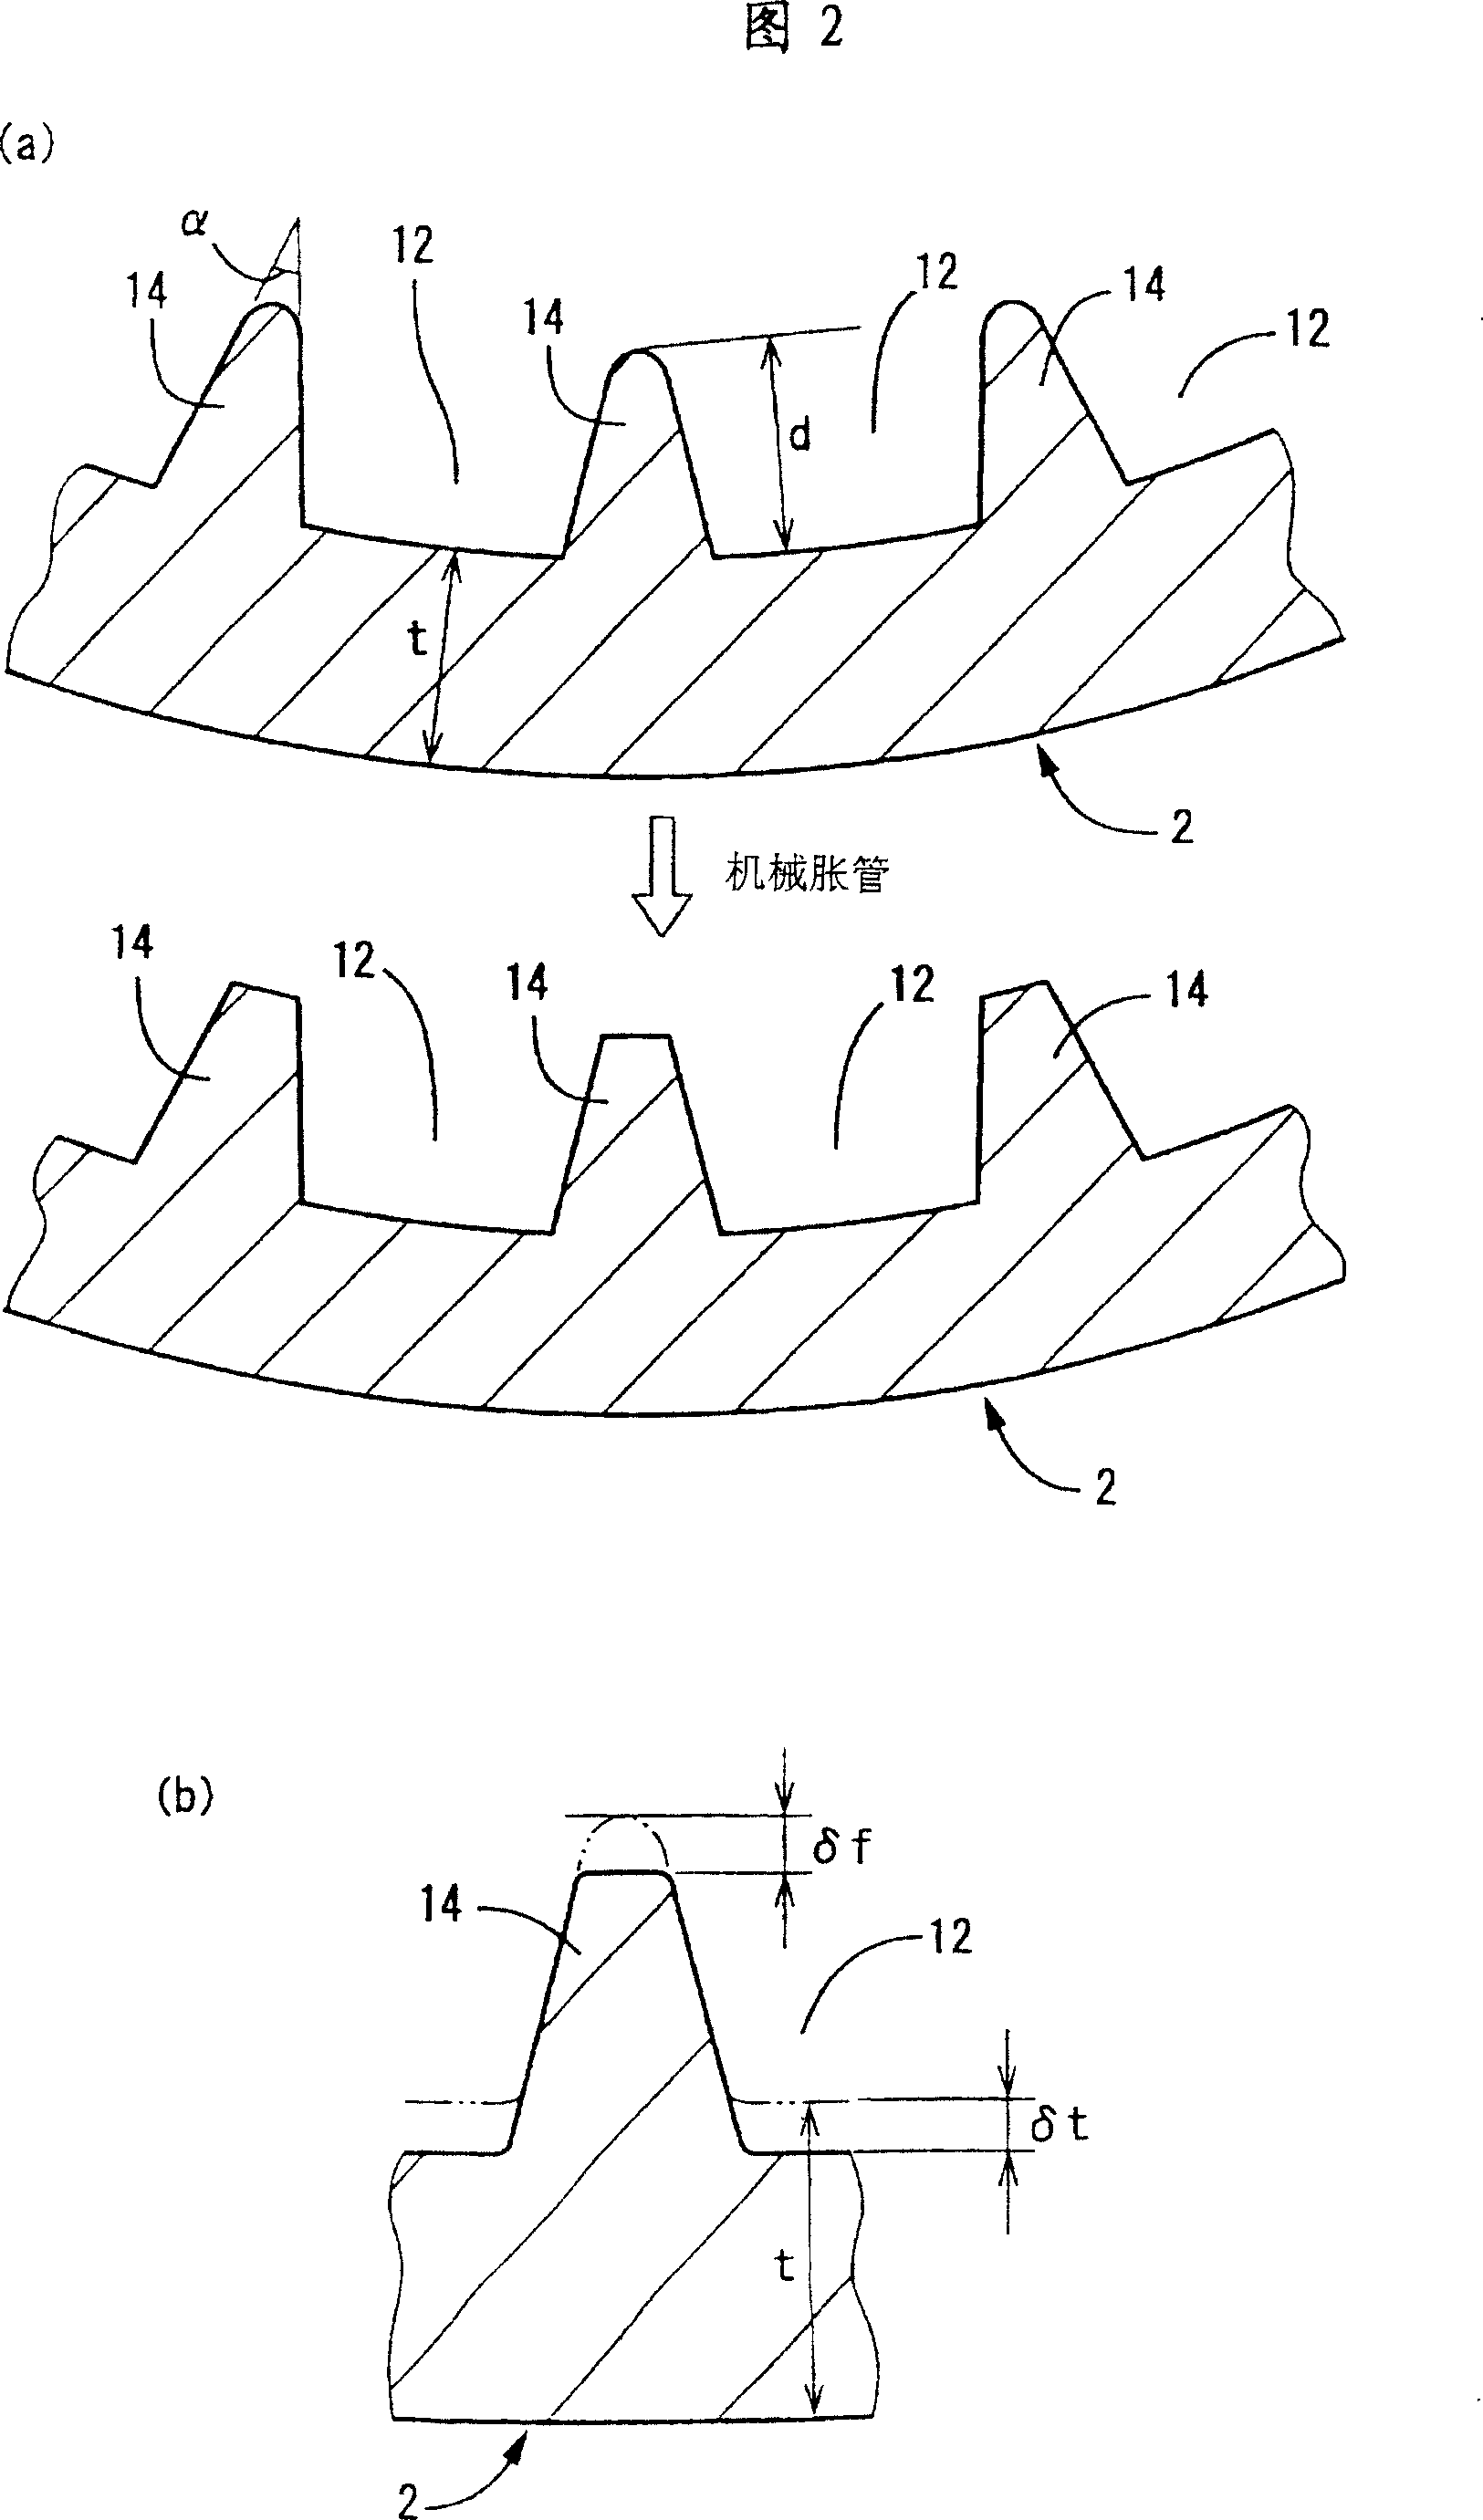 Heat-transfer tube with groove on inwall and method for manufacturing heat exchanger using the heat-transfer tube